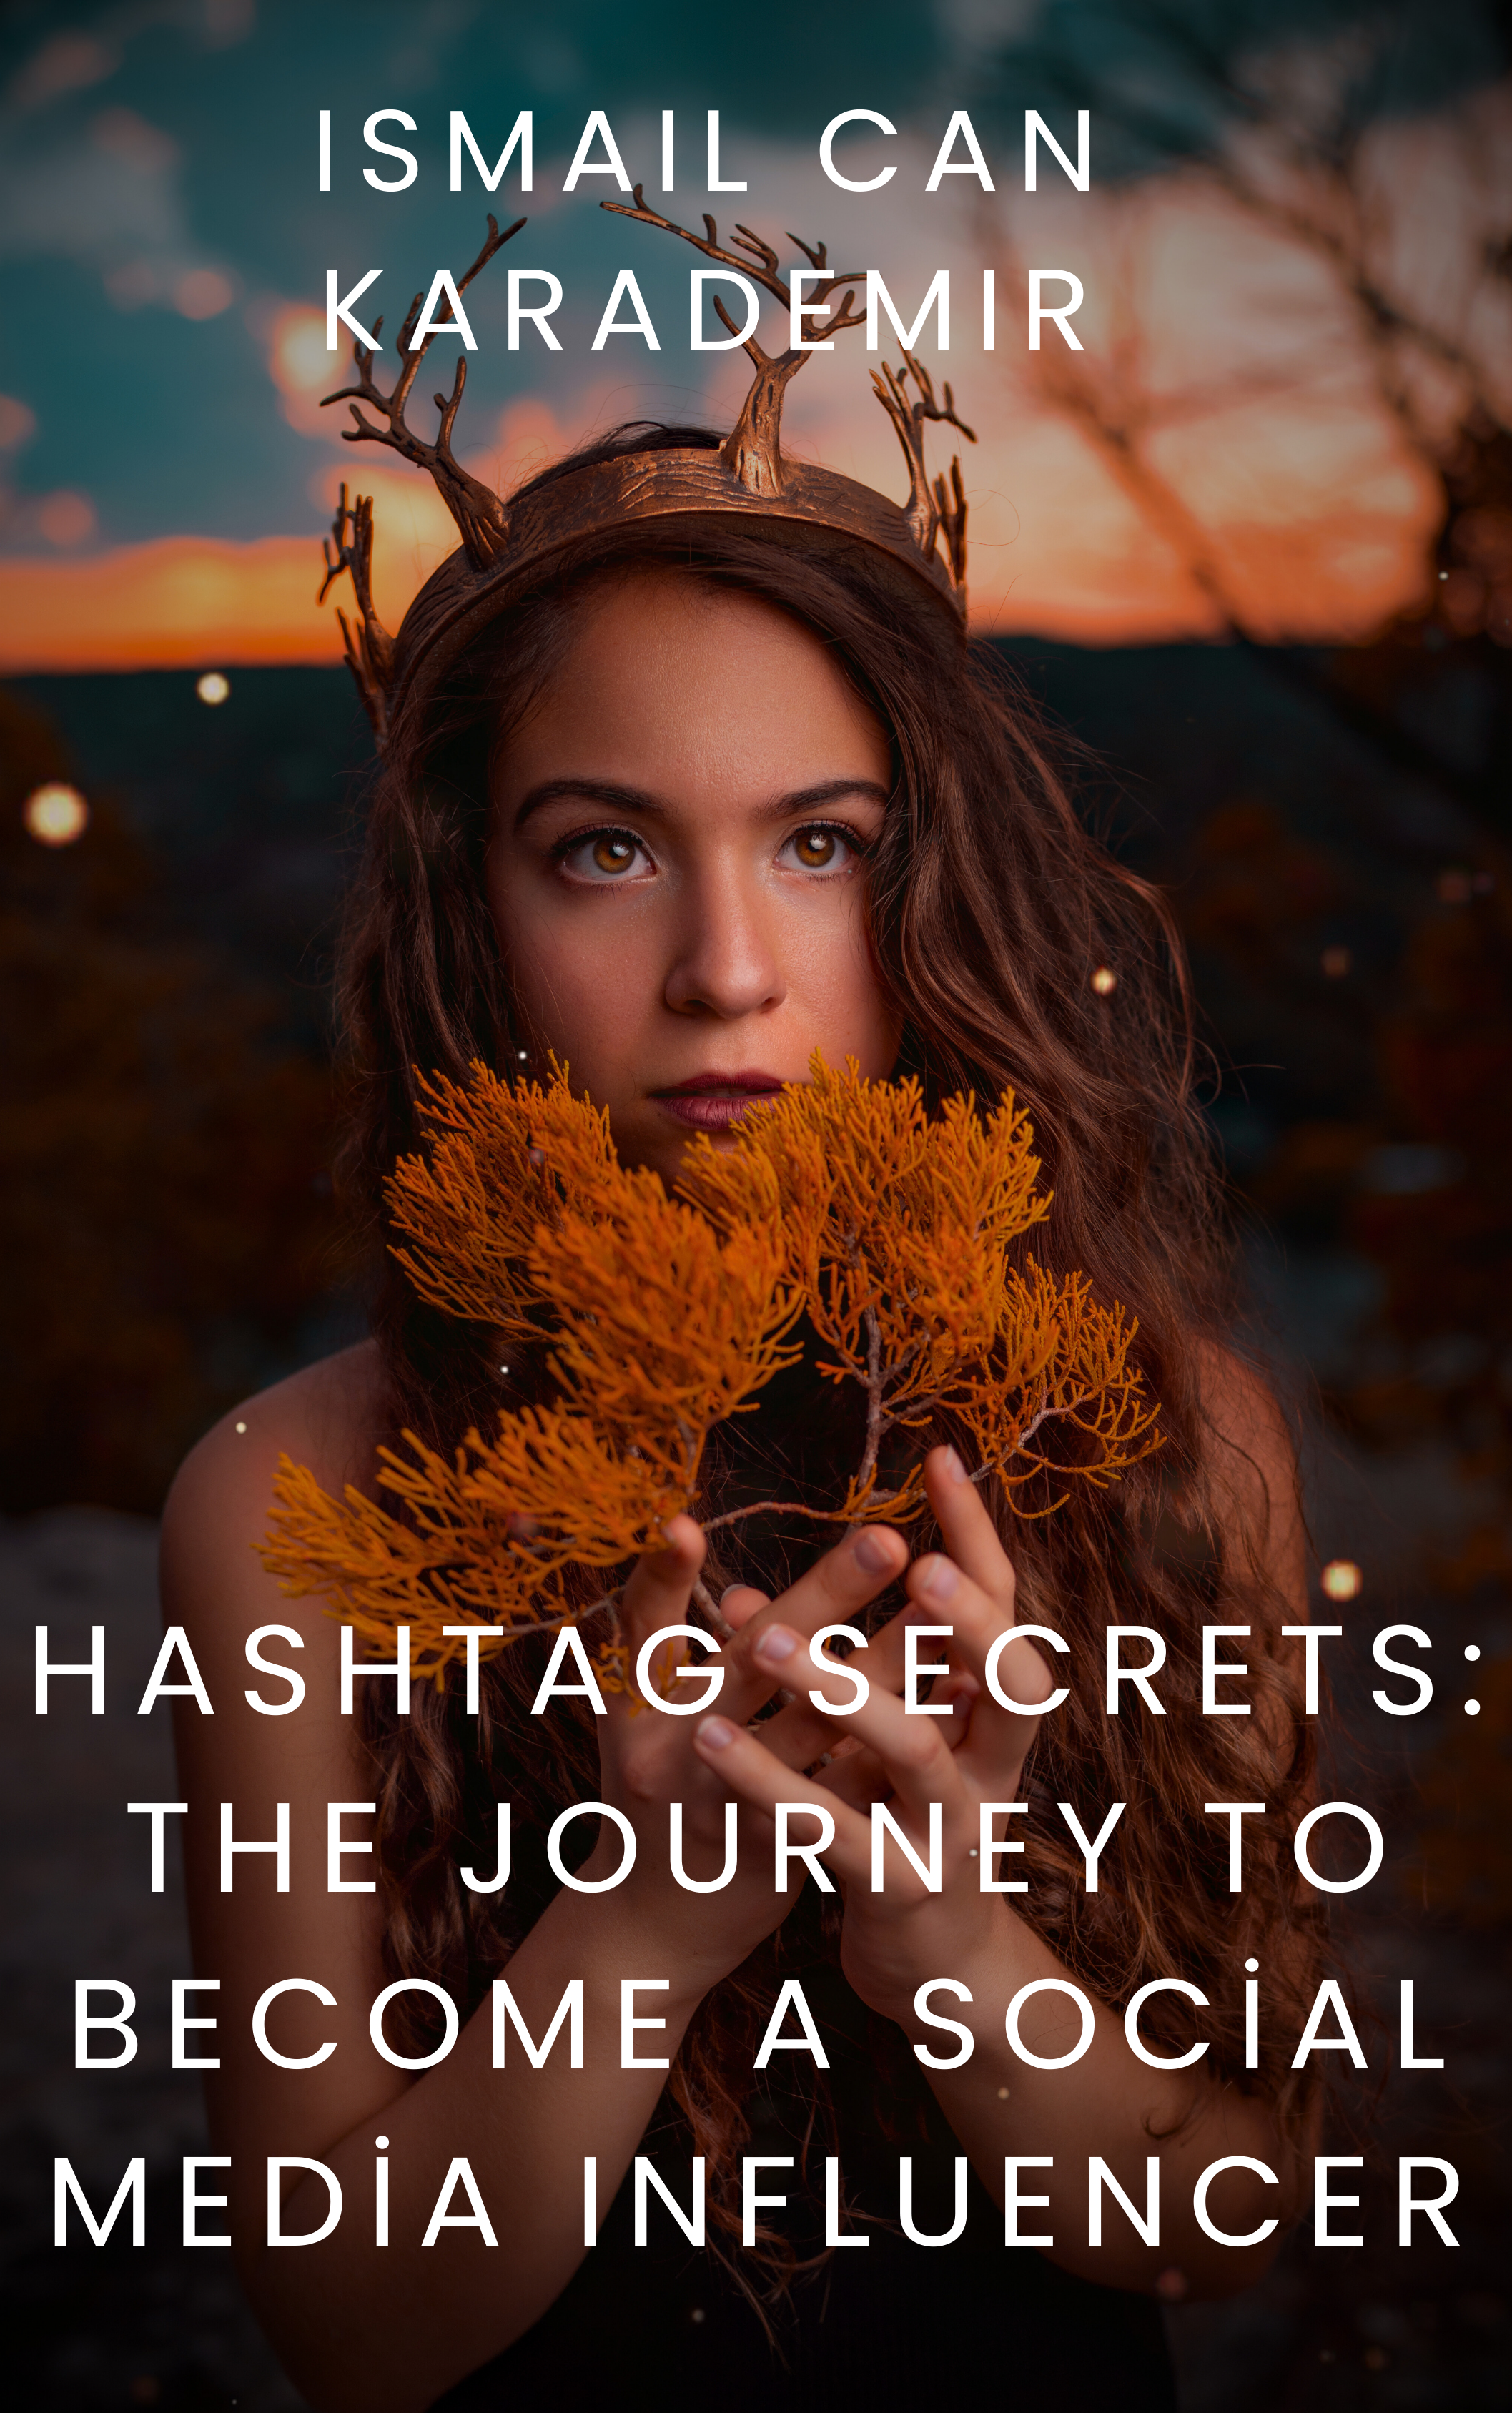 Hashtag Secrets The Journey to Become a Social Media Influencer Available in Big Book Stores!